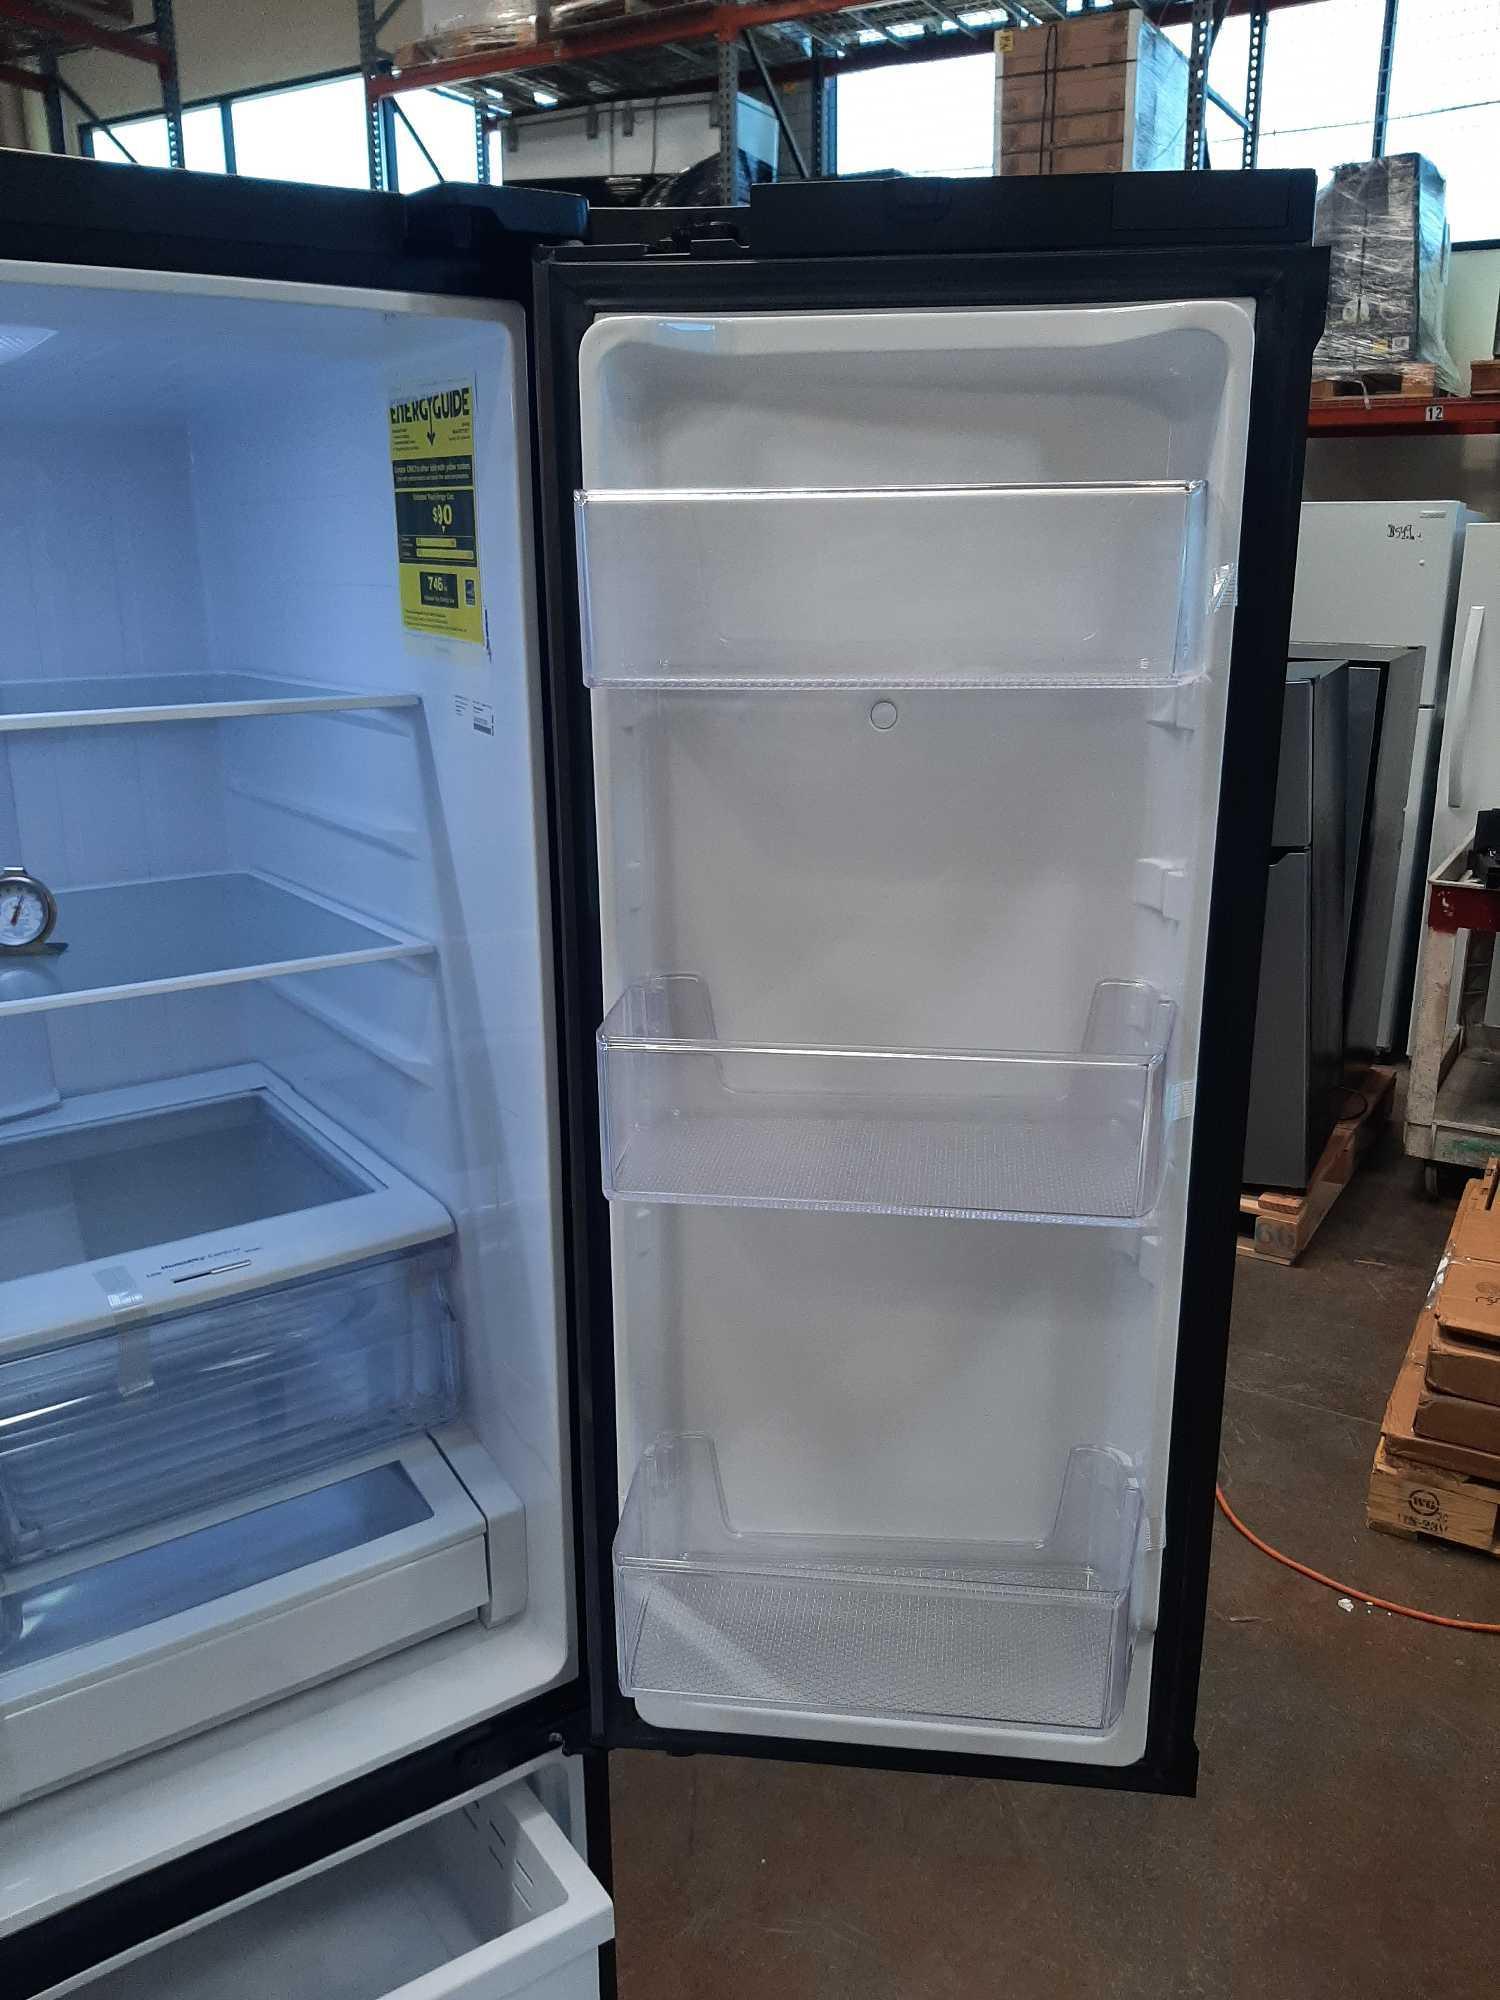 Samsung 26.5 cu. ft. Large Capacity 3 Door French Door Refrigerator*COLD*PREVIOUSLY INSTALLED